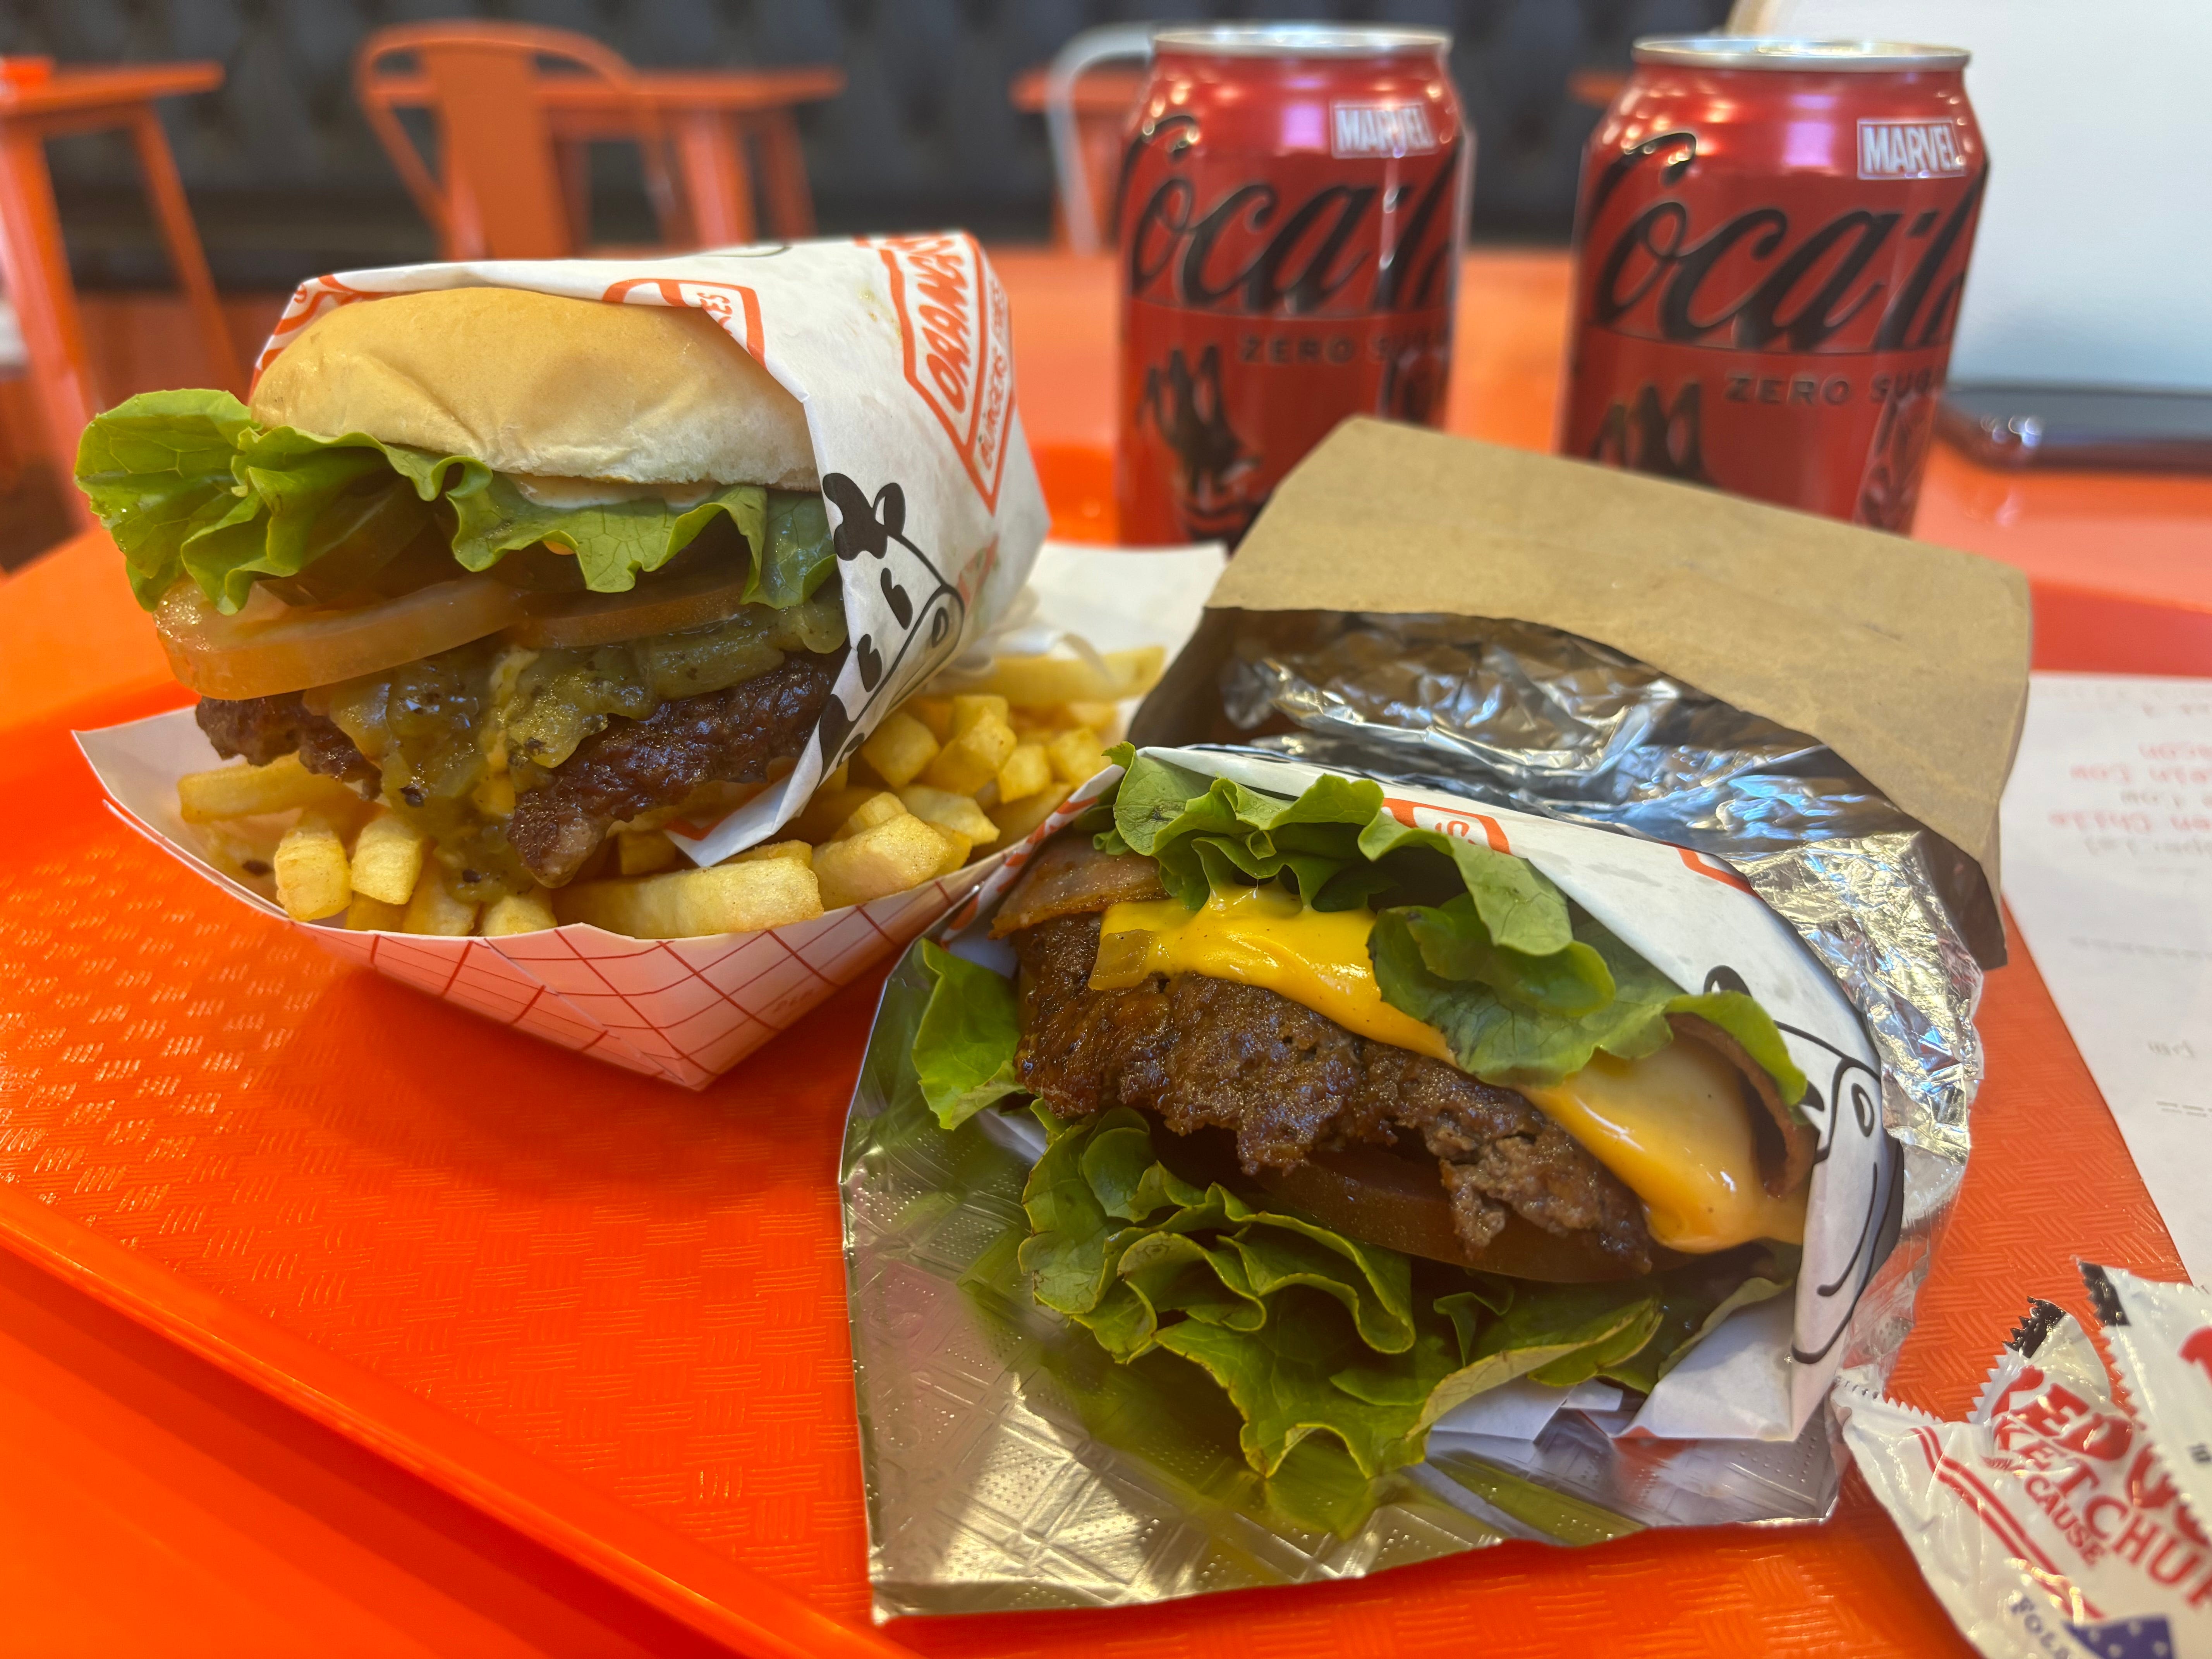 Orange Cow Burgers: El Paso's answer to In-N-Out? Here's our take